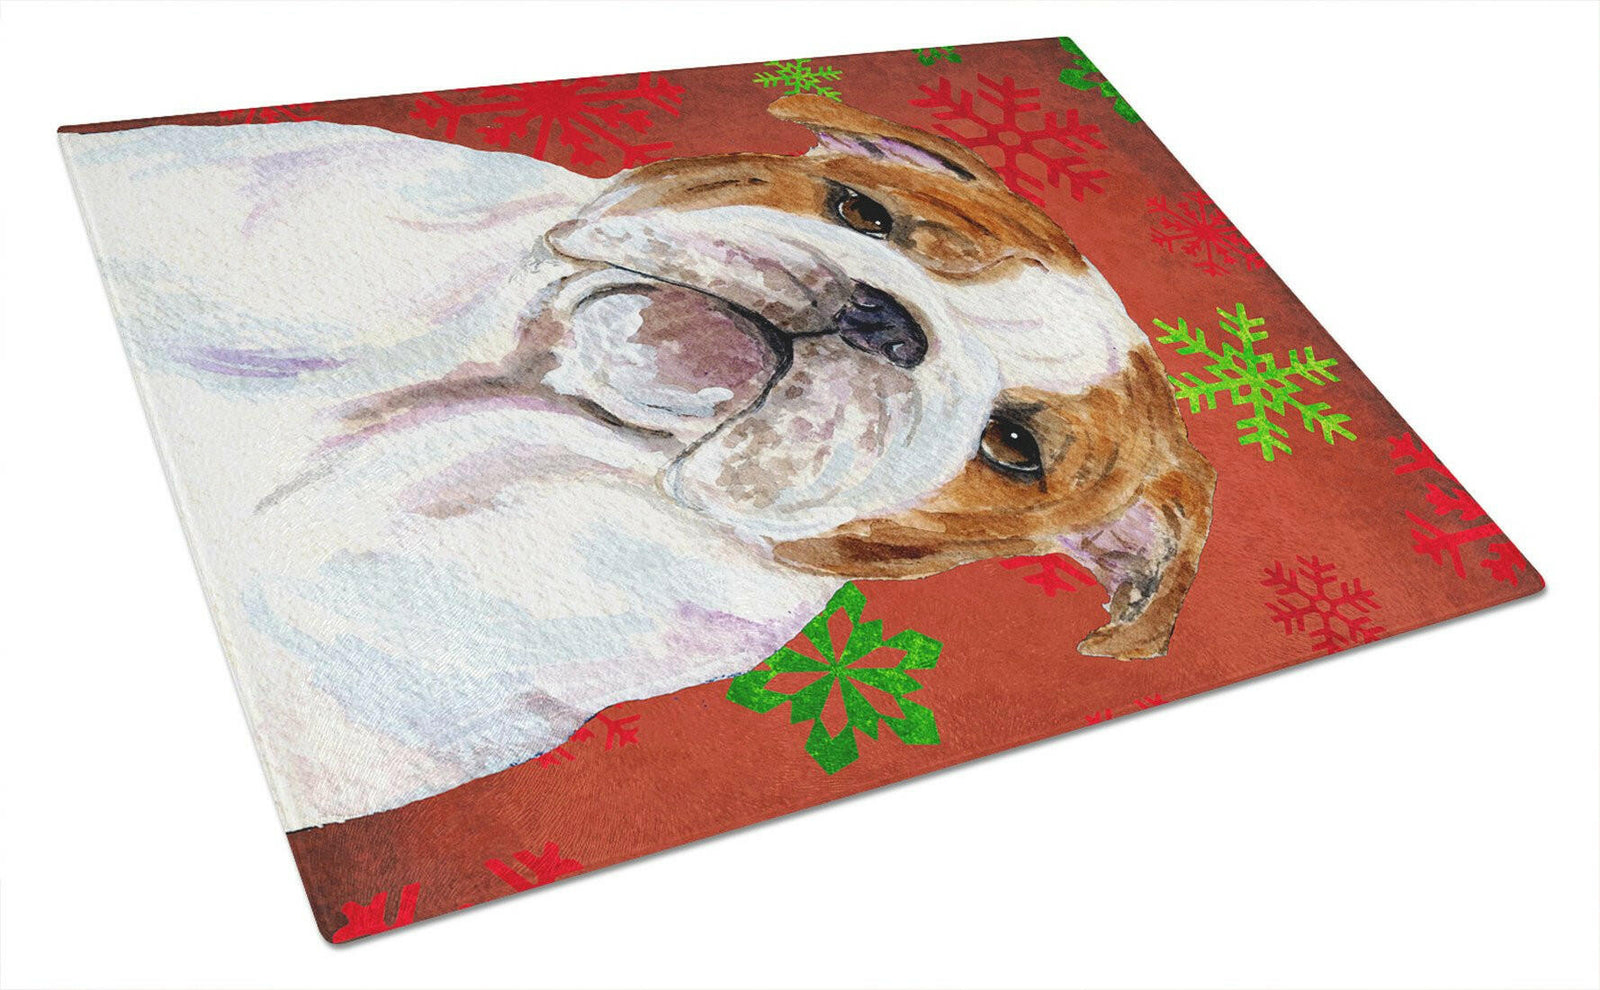 Bulldog English Red and Green Snowflakes Christmas Glass Cutting Board Large by Caroline's Treasures